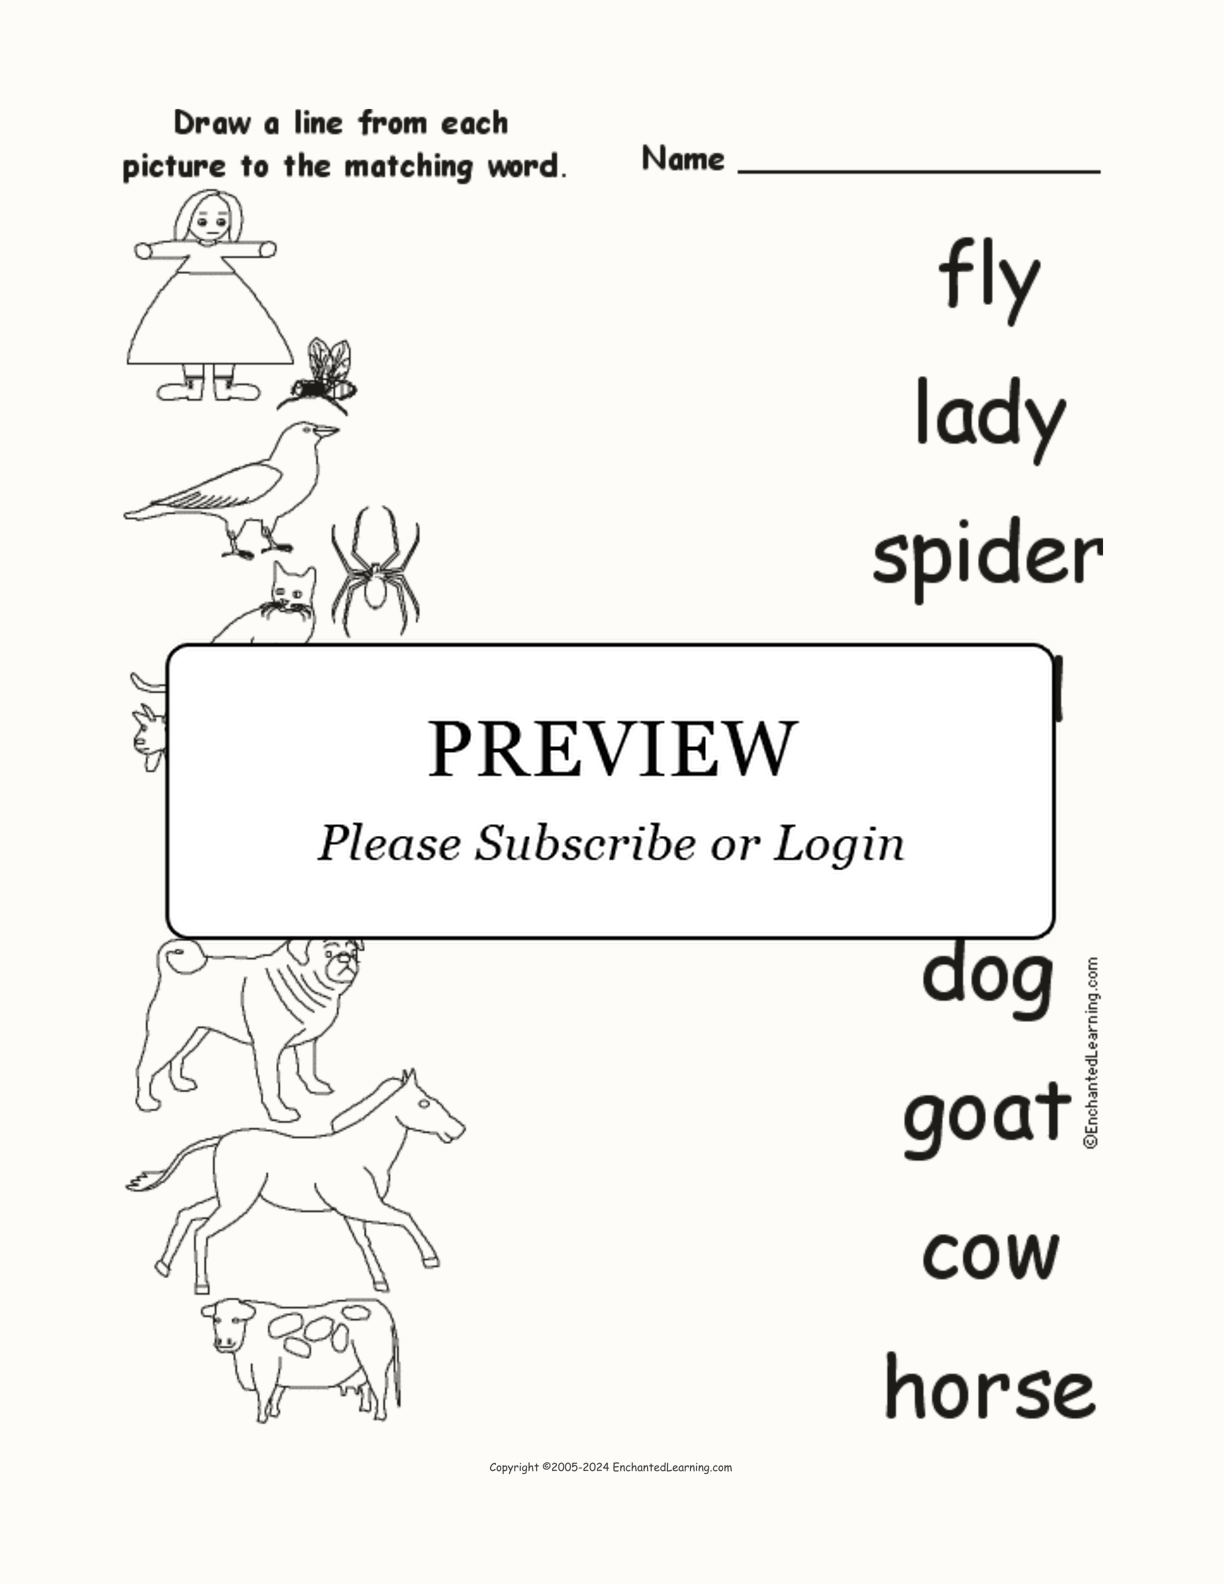 Match 'The Old Lady and the Fly' Words to the Pictures interactive worksheet page 1